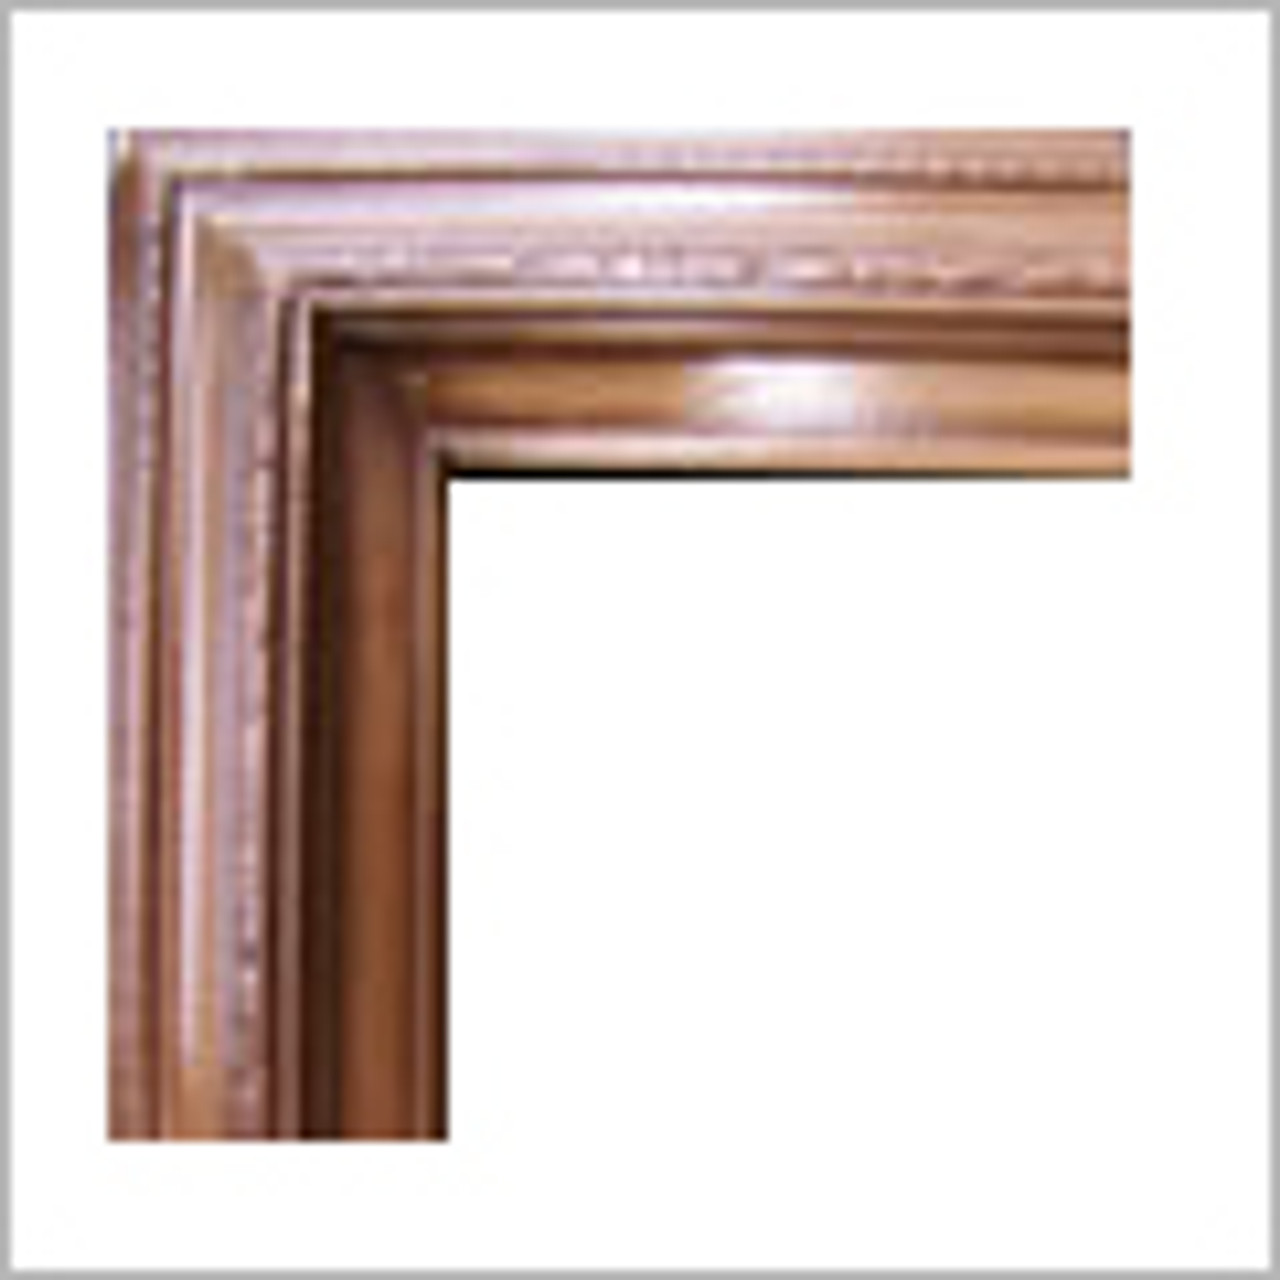  3 Inch Deluxe Wood Frames: 19X25*